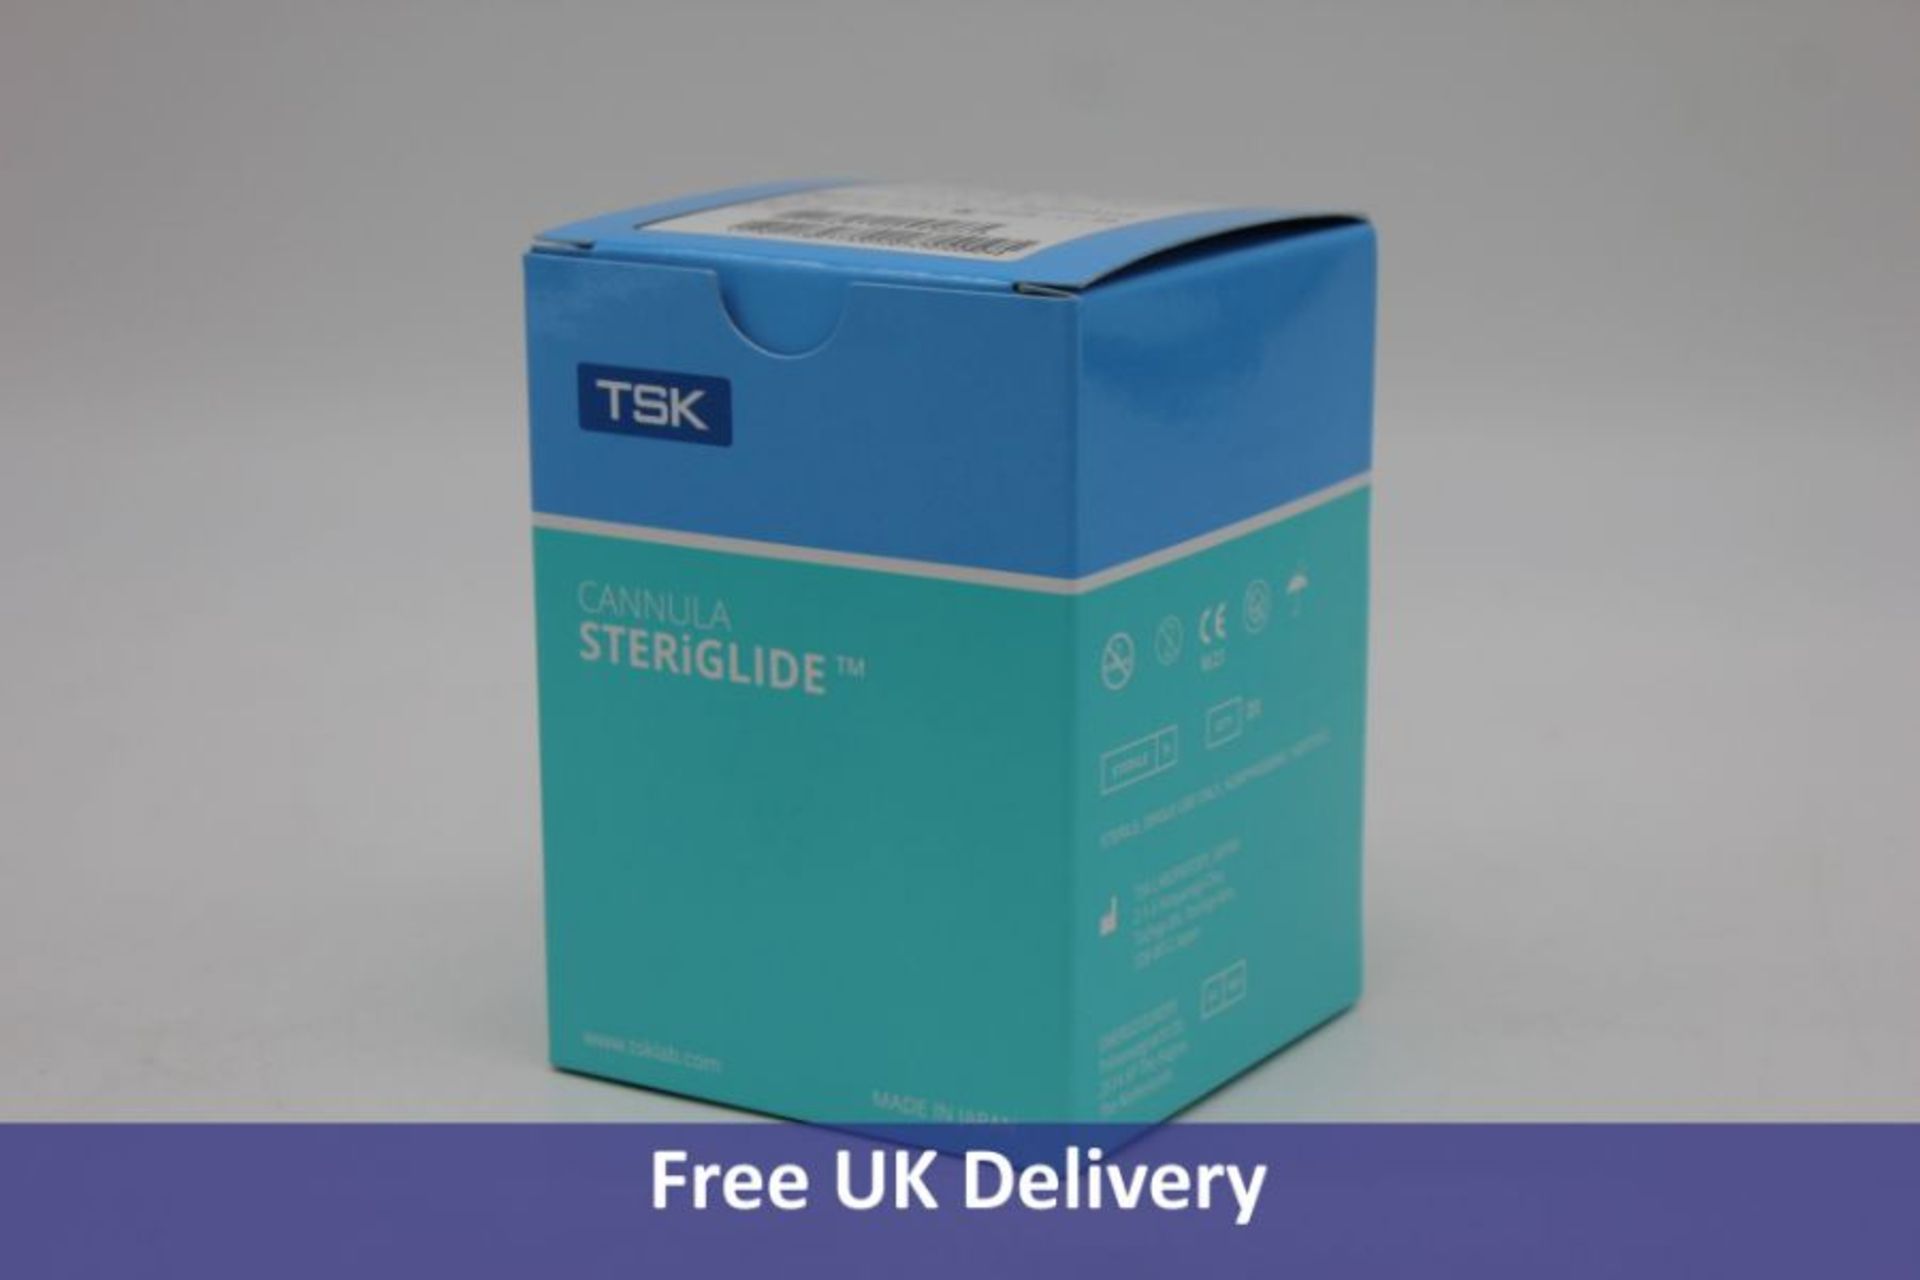 Steriglide Cannula Healthcare Products to include 1x Size 22G X 2", LOT 208046, Expiry Date 2025-11-